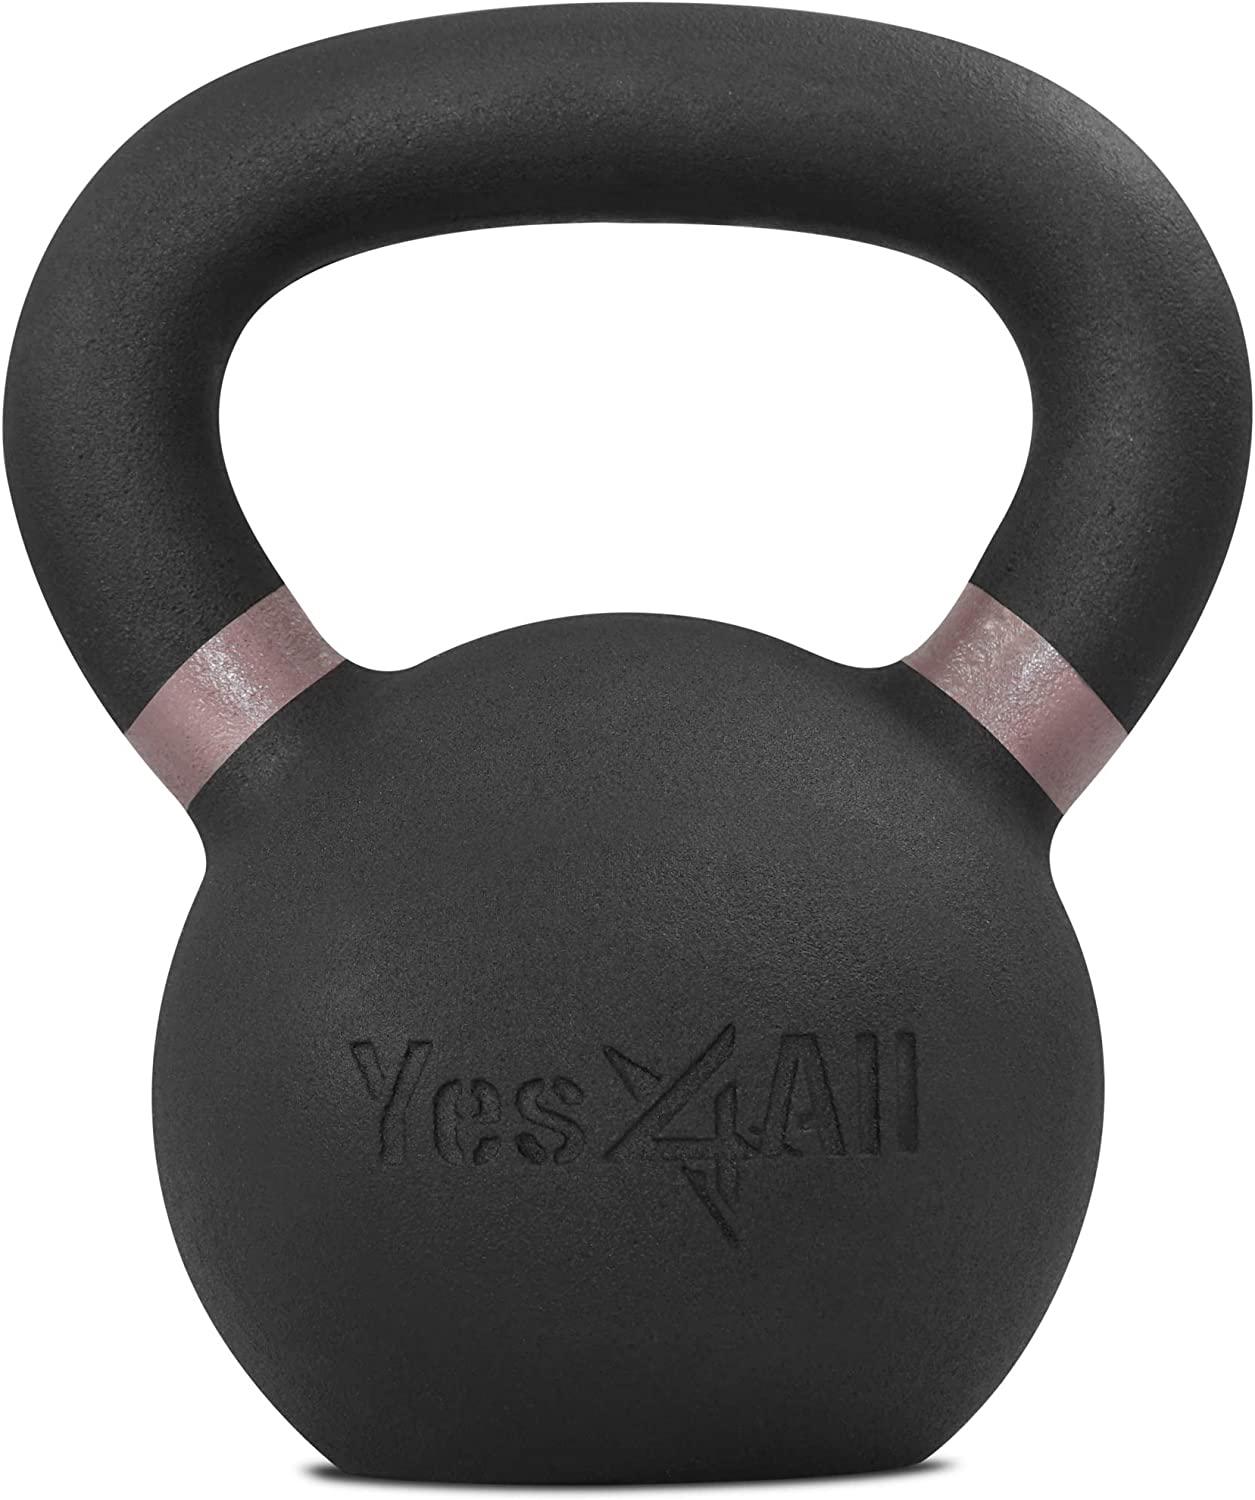 Yes4All 14kg / 31lb Powder Coated Kettlebell, Single - image 4 of 9